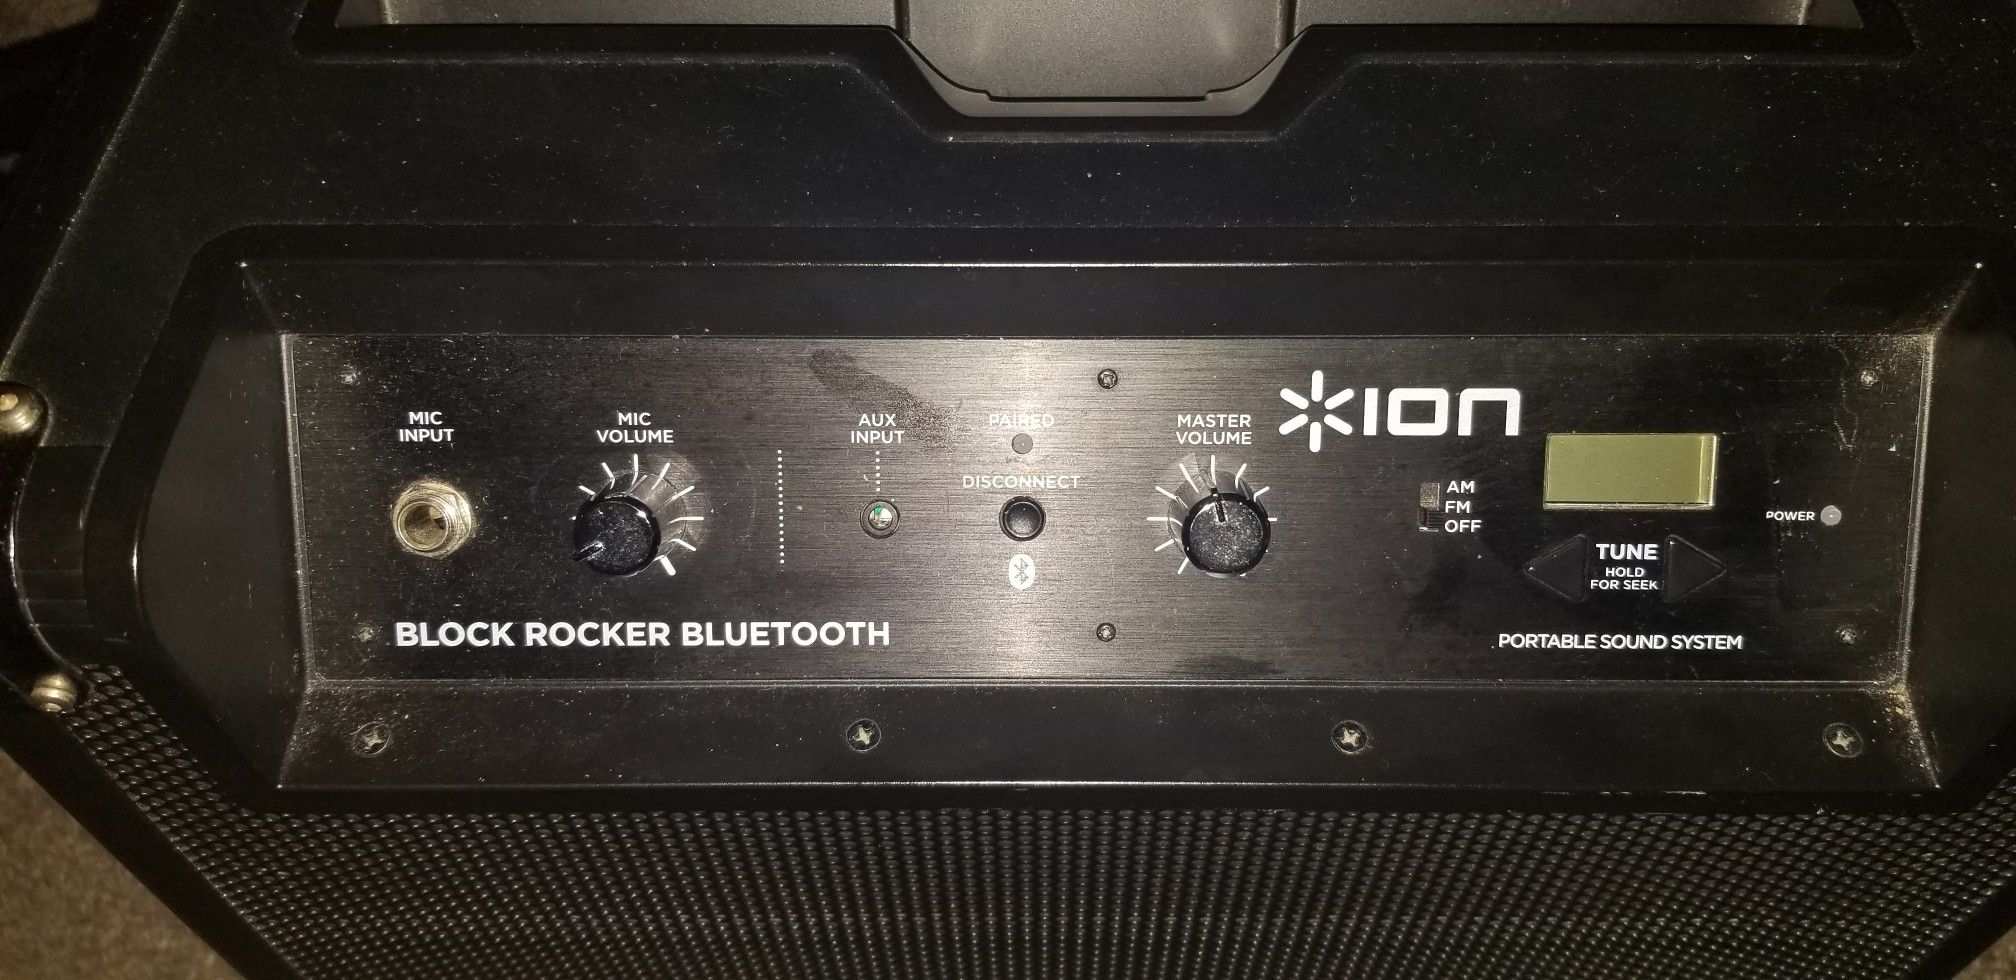 ION Boom Bluetooth phone charger speaker